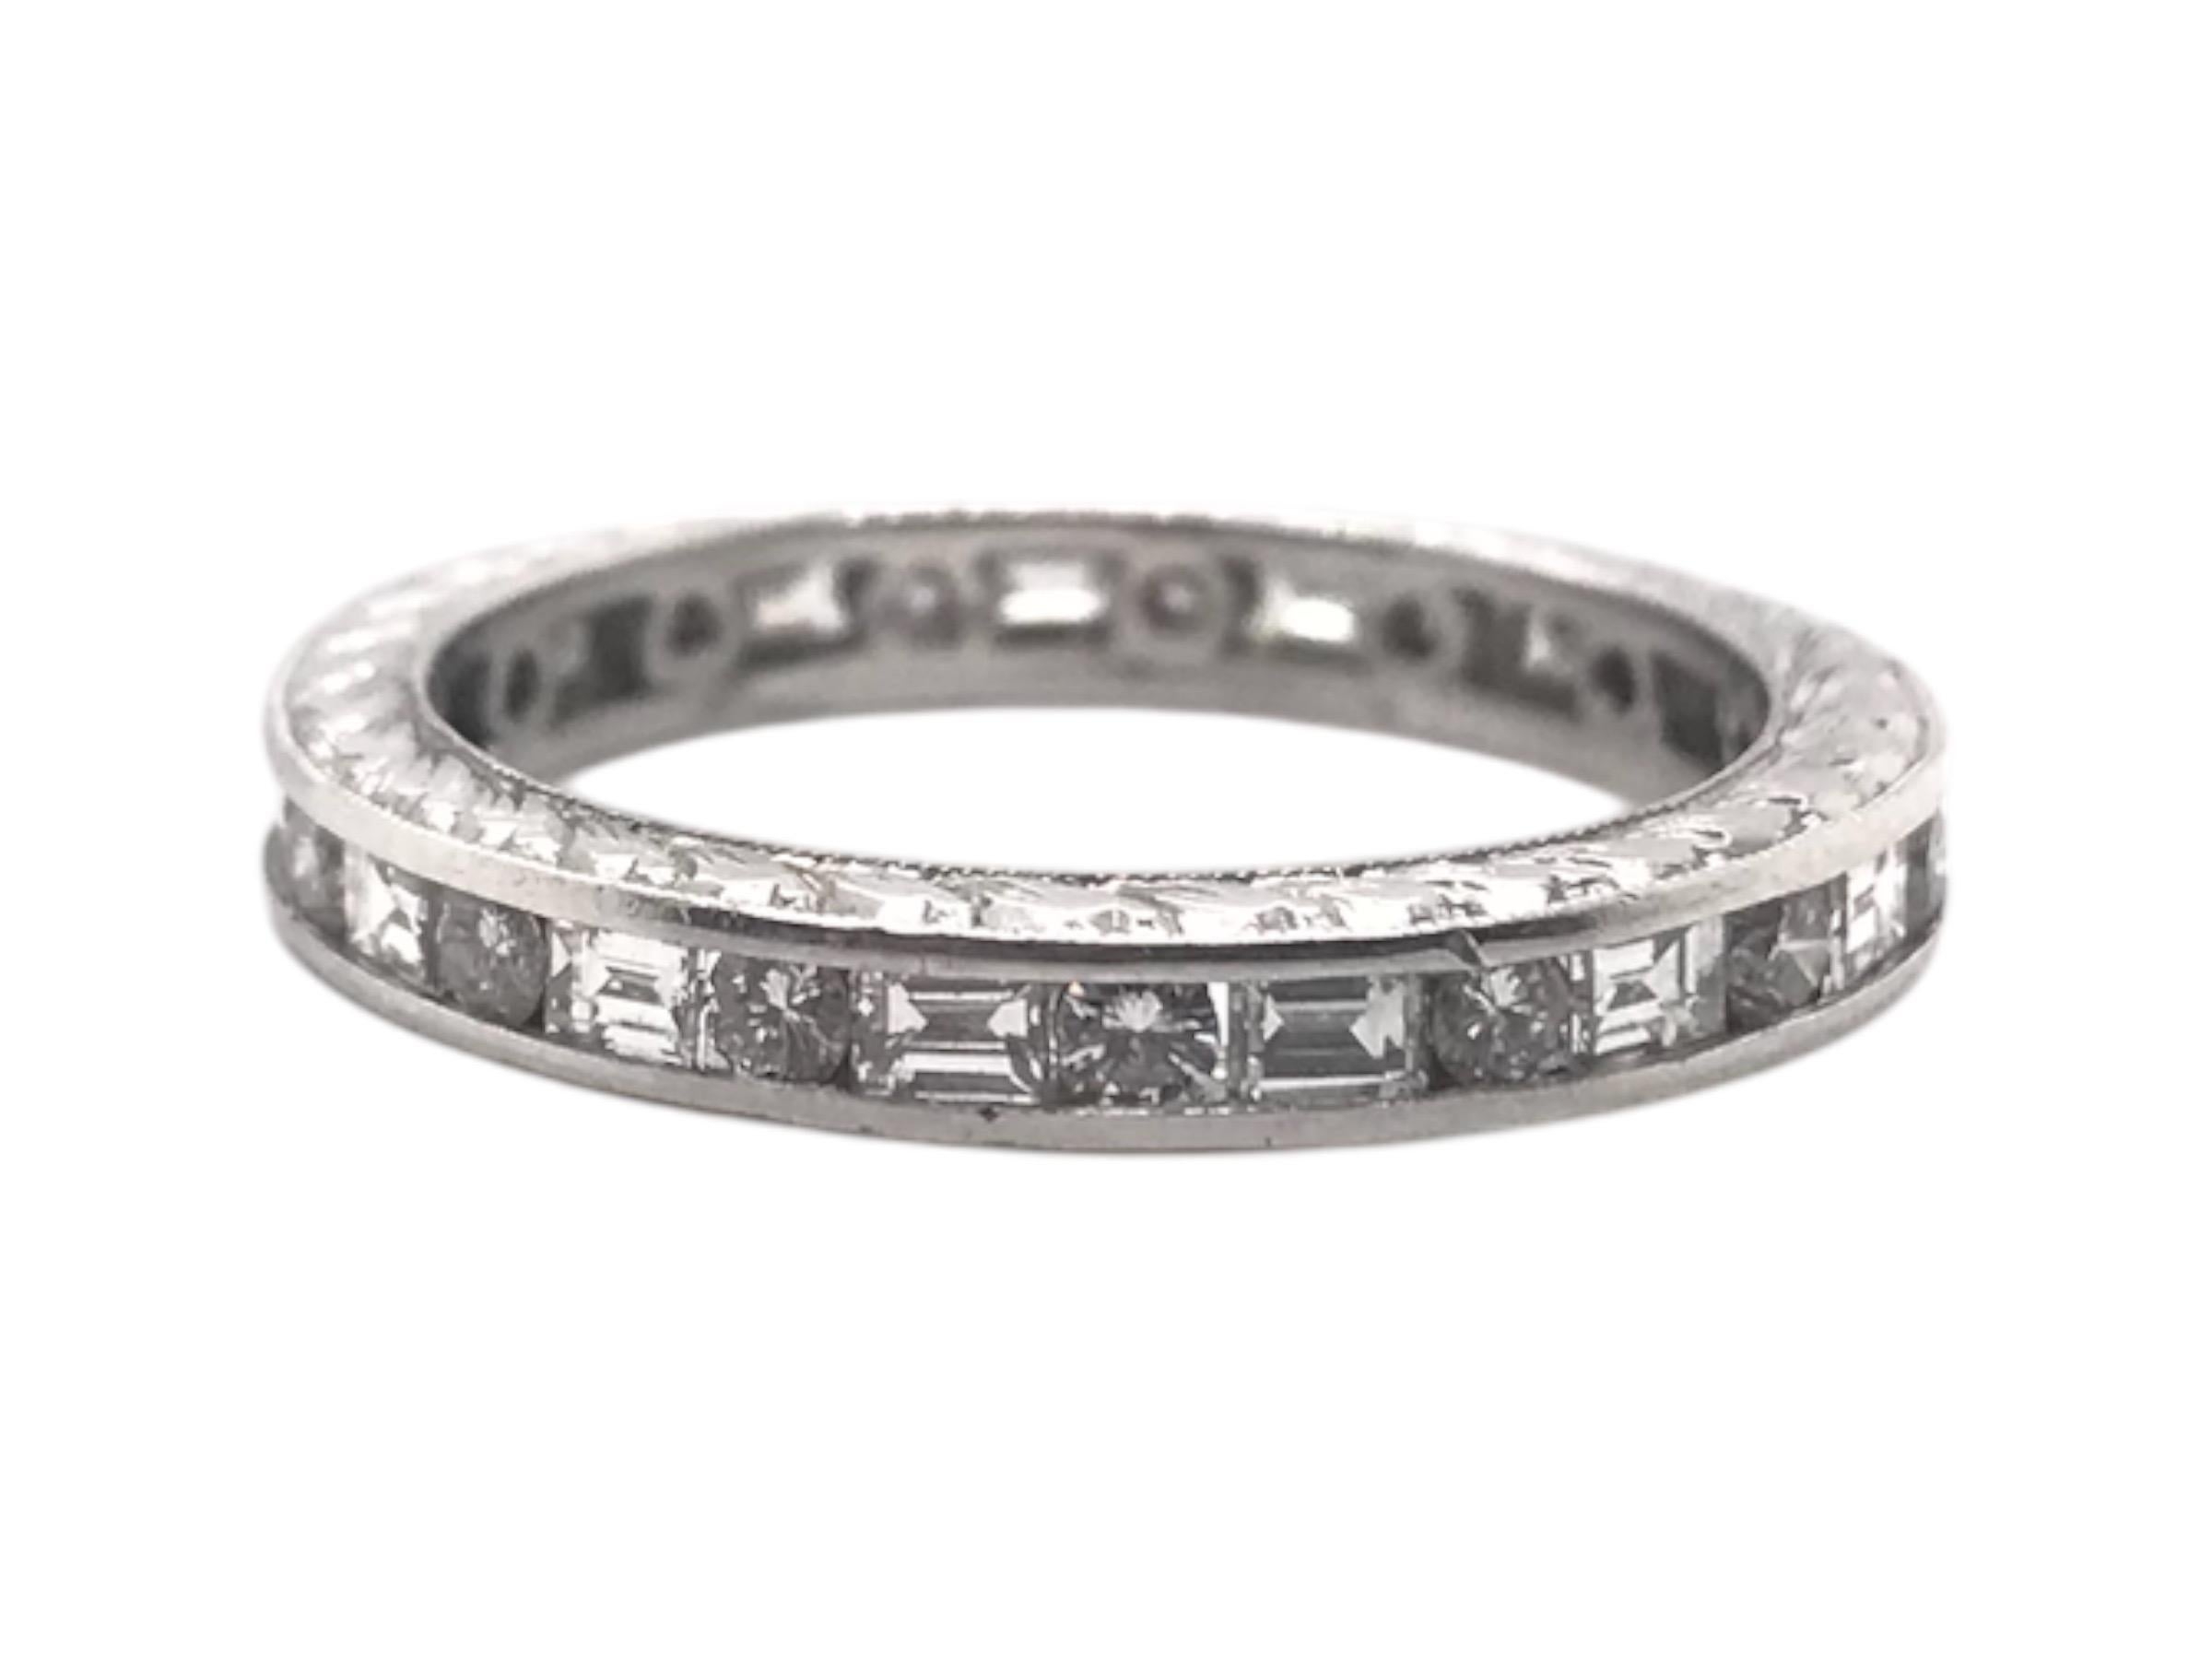 This lovely band is the perfect combination of vintage & modern!
The ring has vintage styled wheat pattern engraving details on the side.

Diamond Details: 
15 - 2.0mm Round Brilliant Cut Diamonds
FG Color; VS Clarity; Estimated Combined Weight: